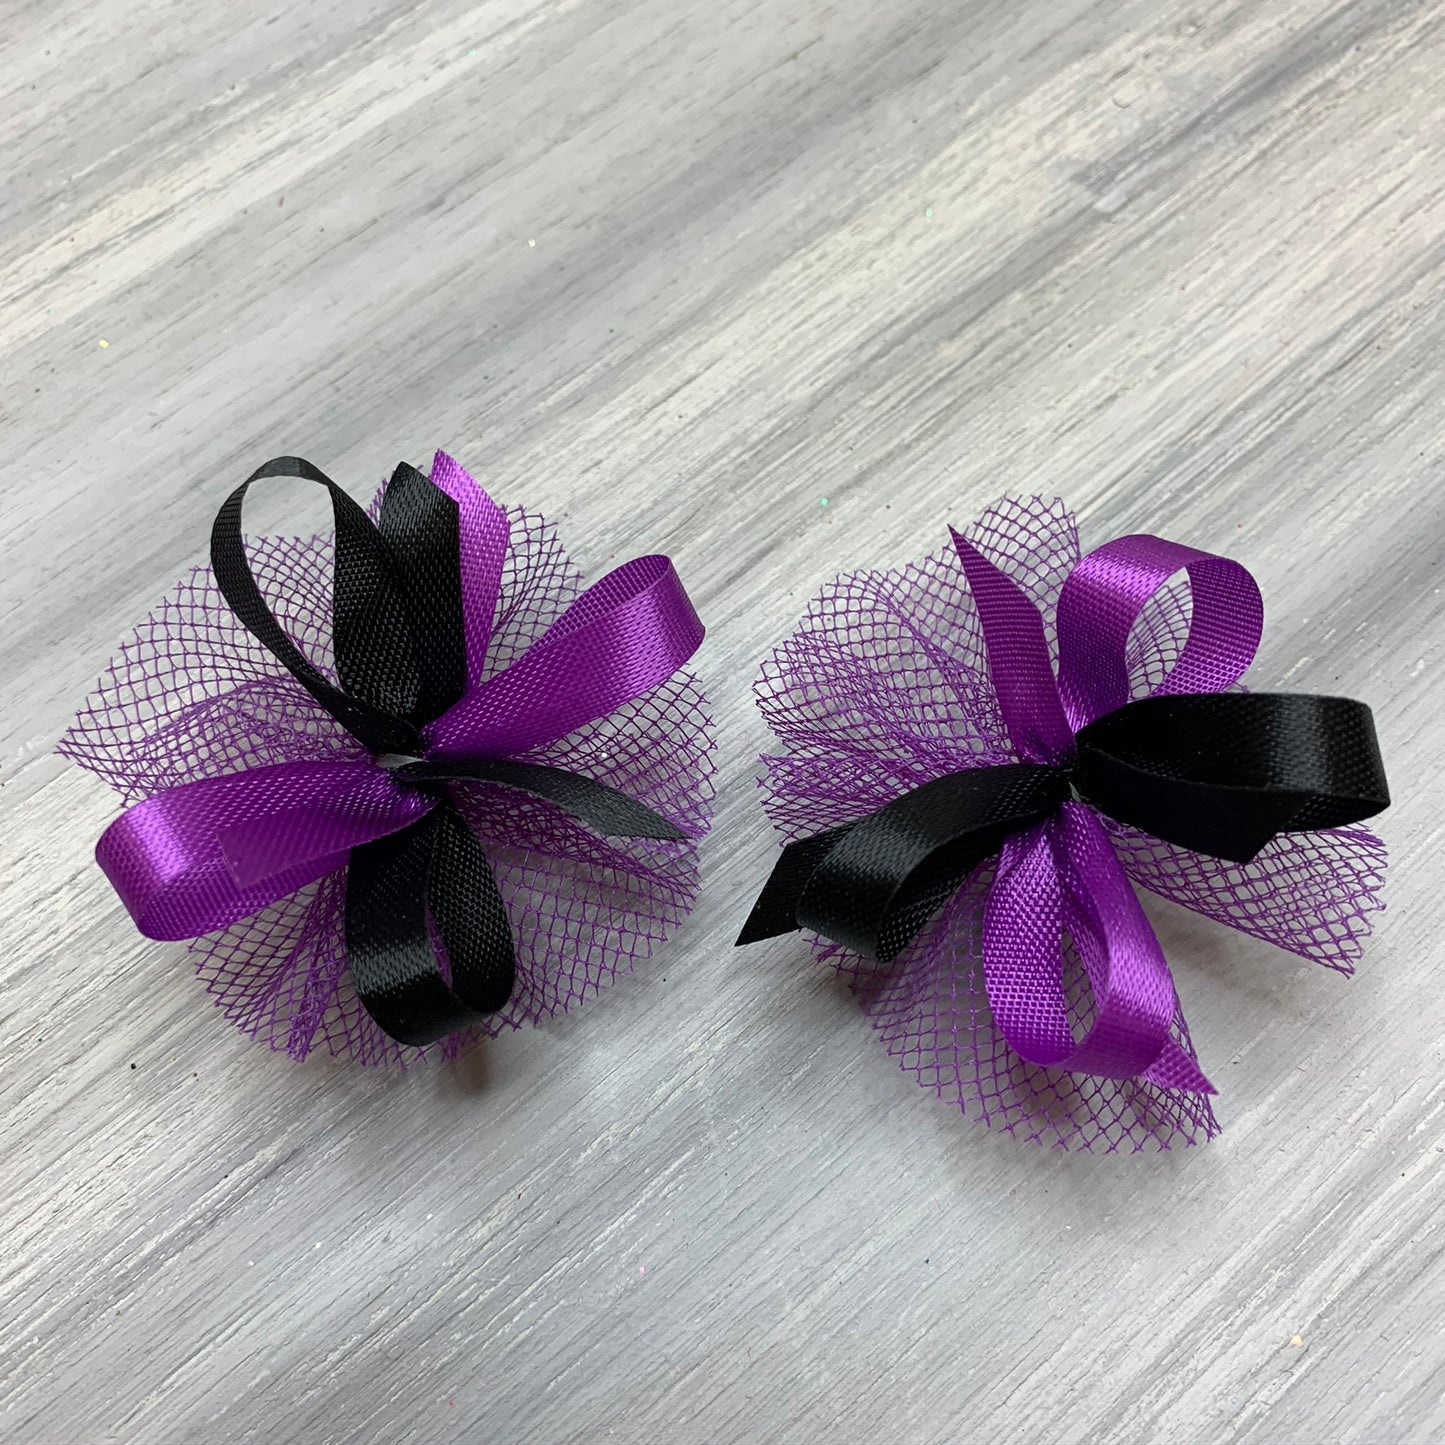 High School & College Color Bows - Black and Purple - 50 Bows